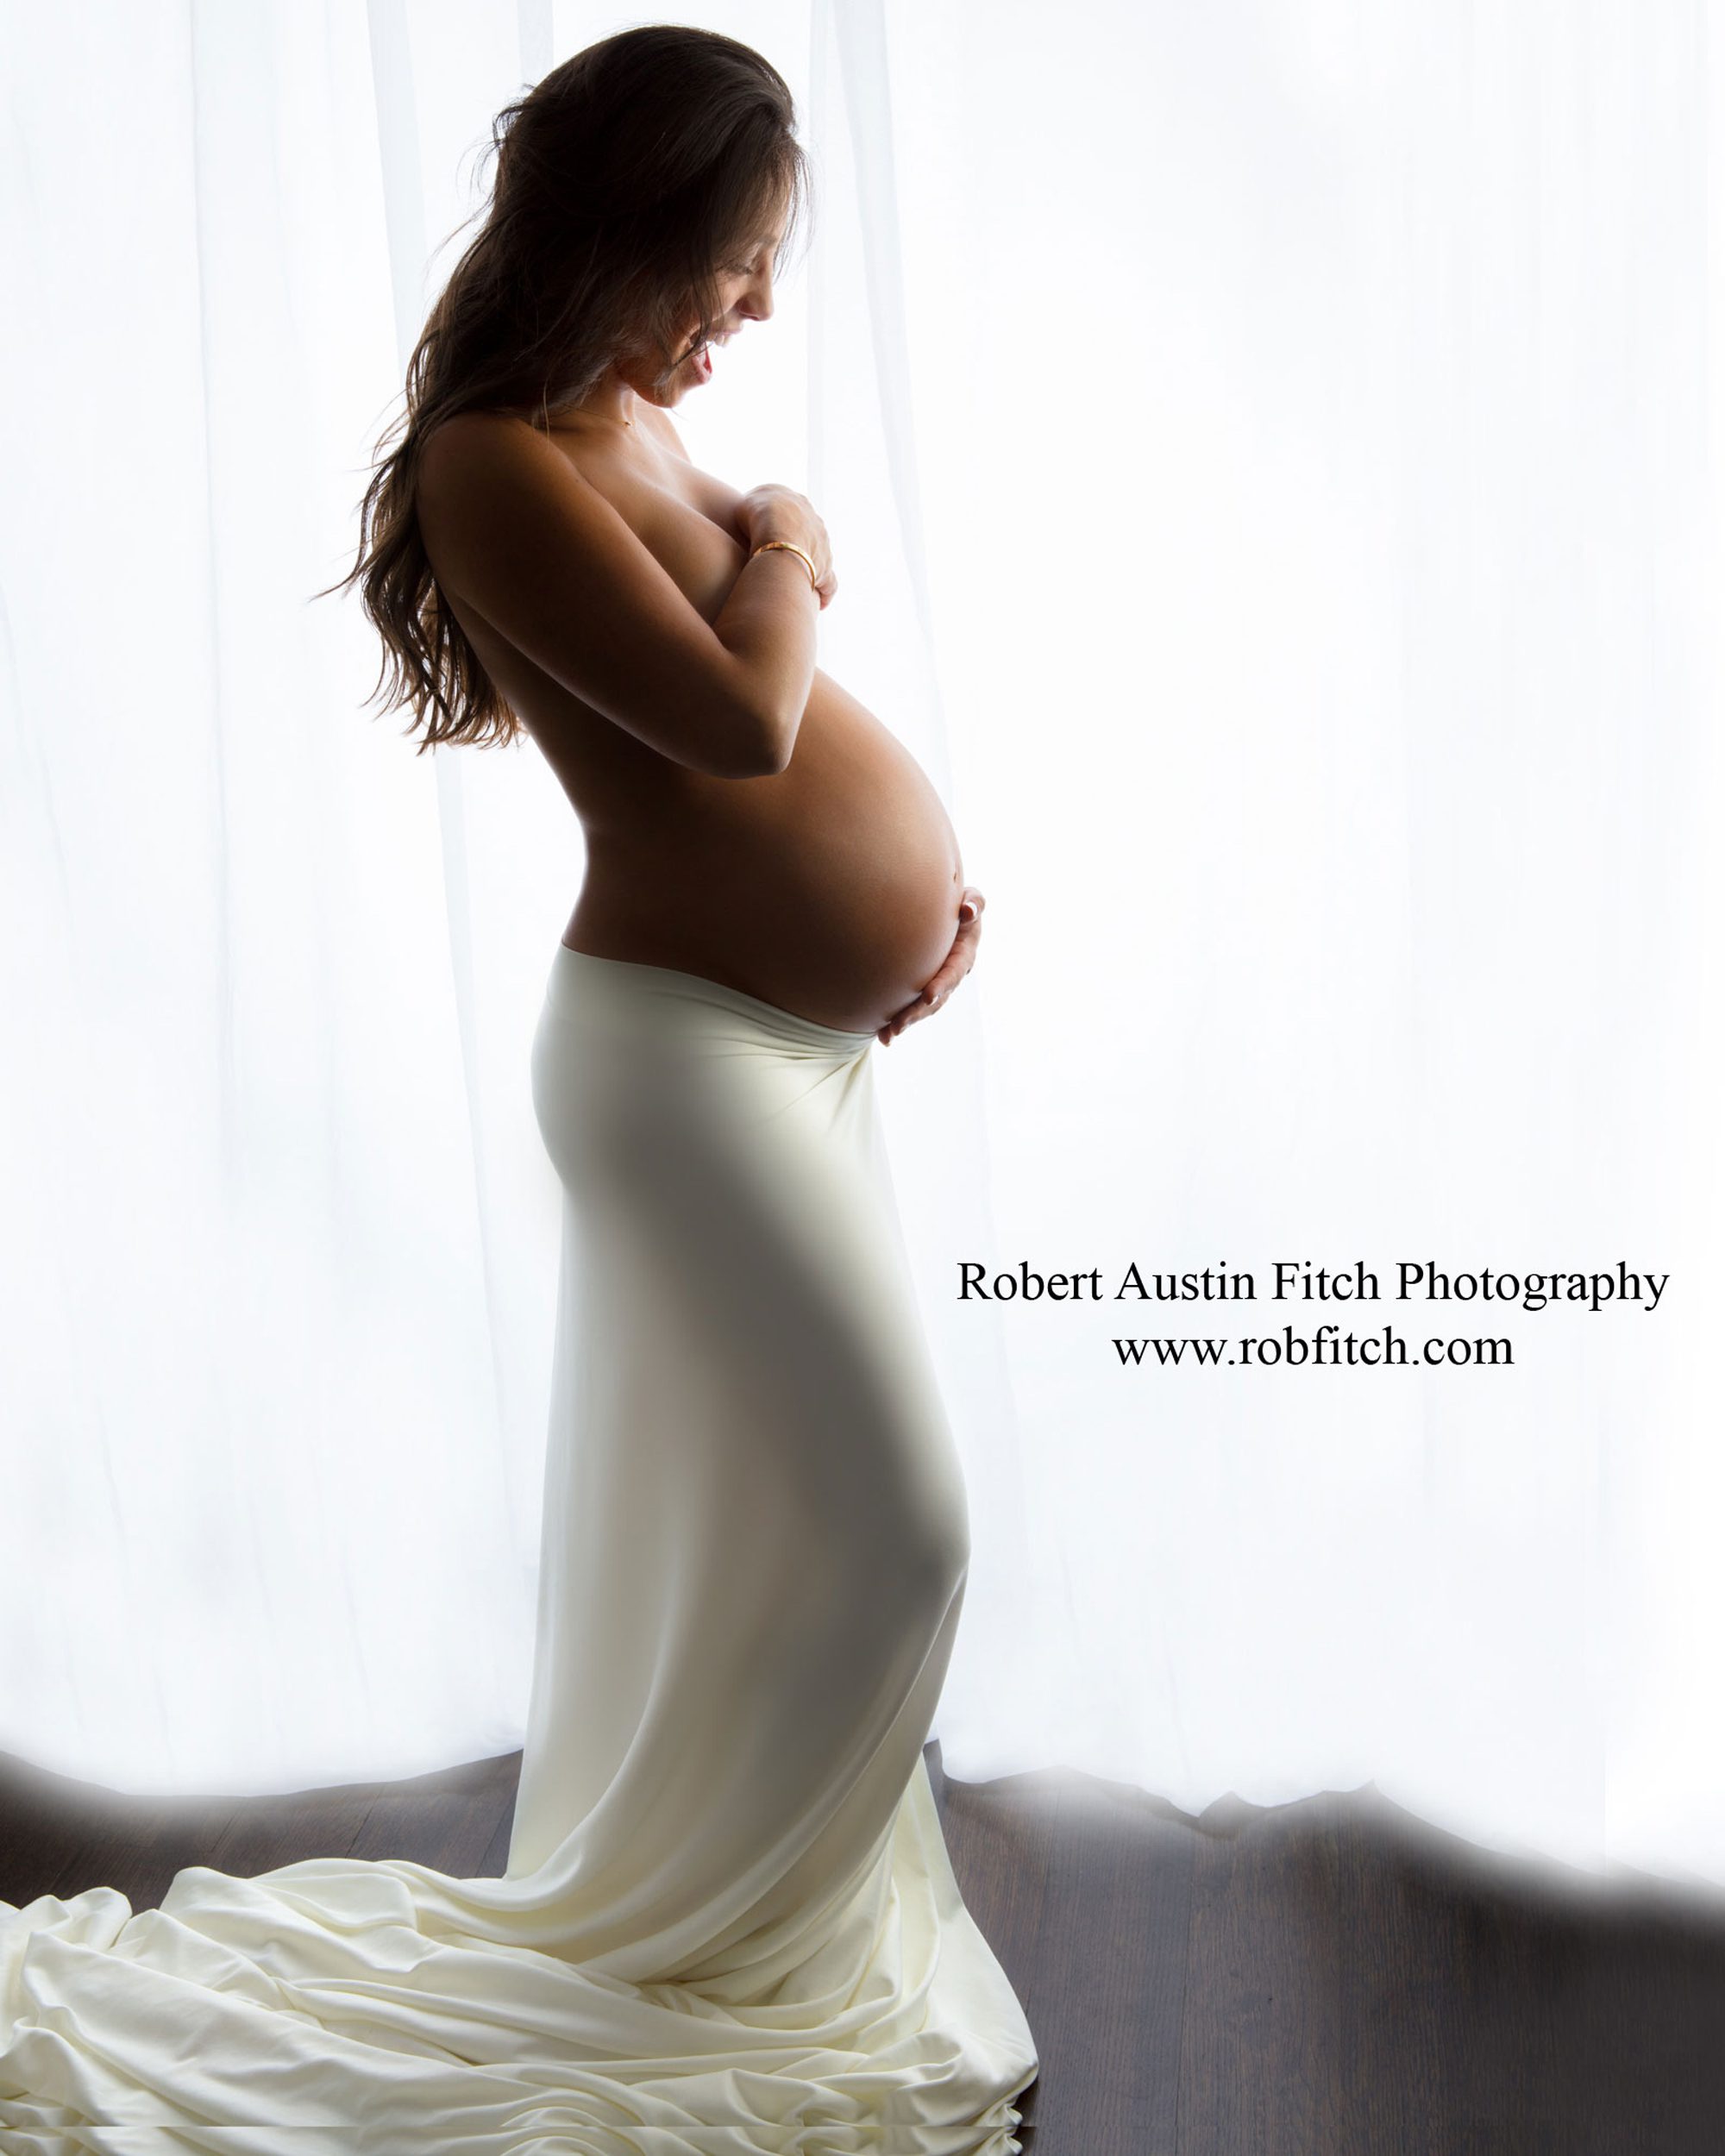 Artistic silhouette maternity photo of pregnant woman with white fabric draping